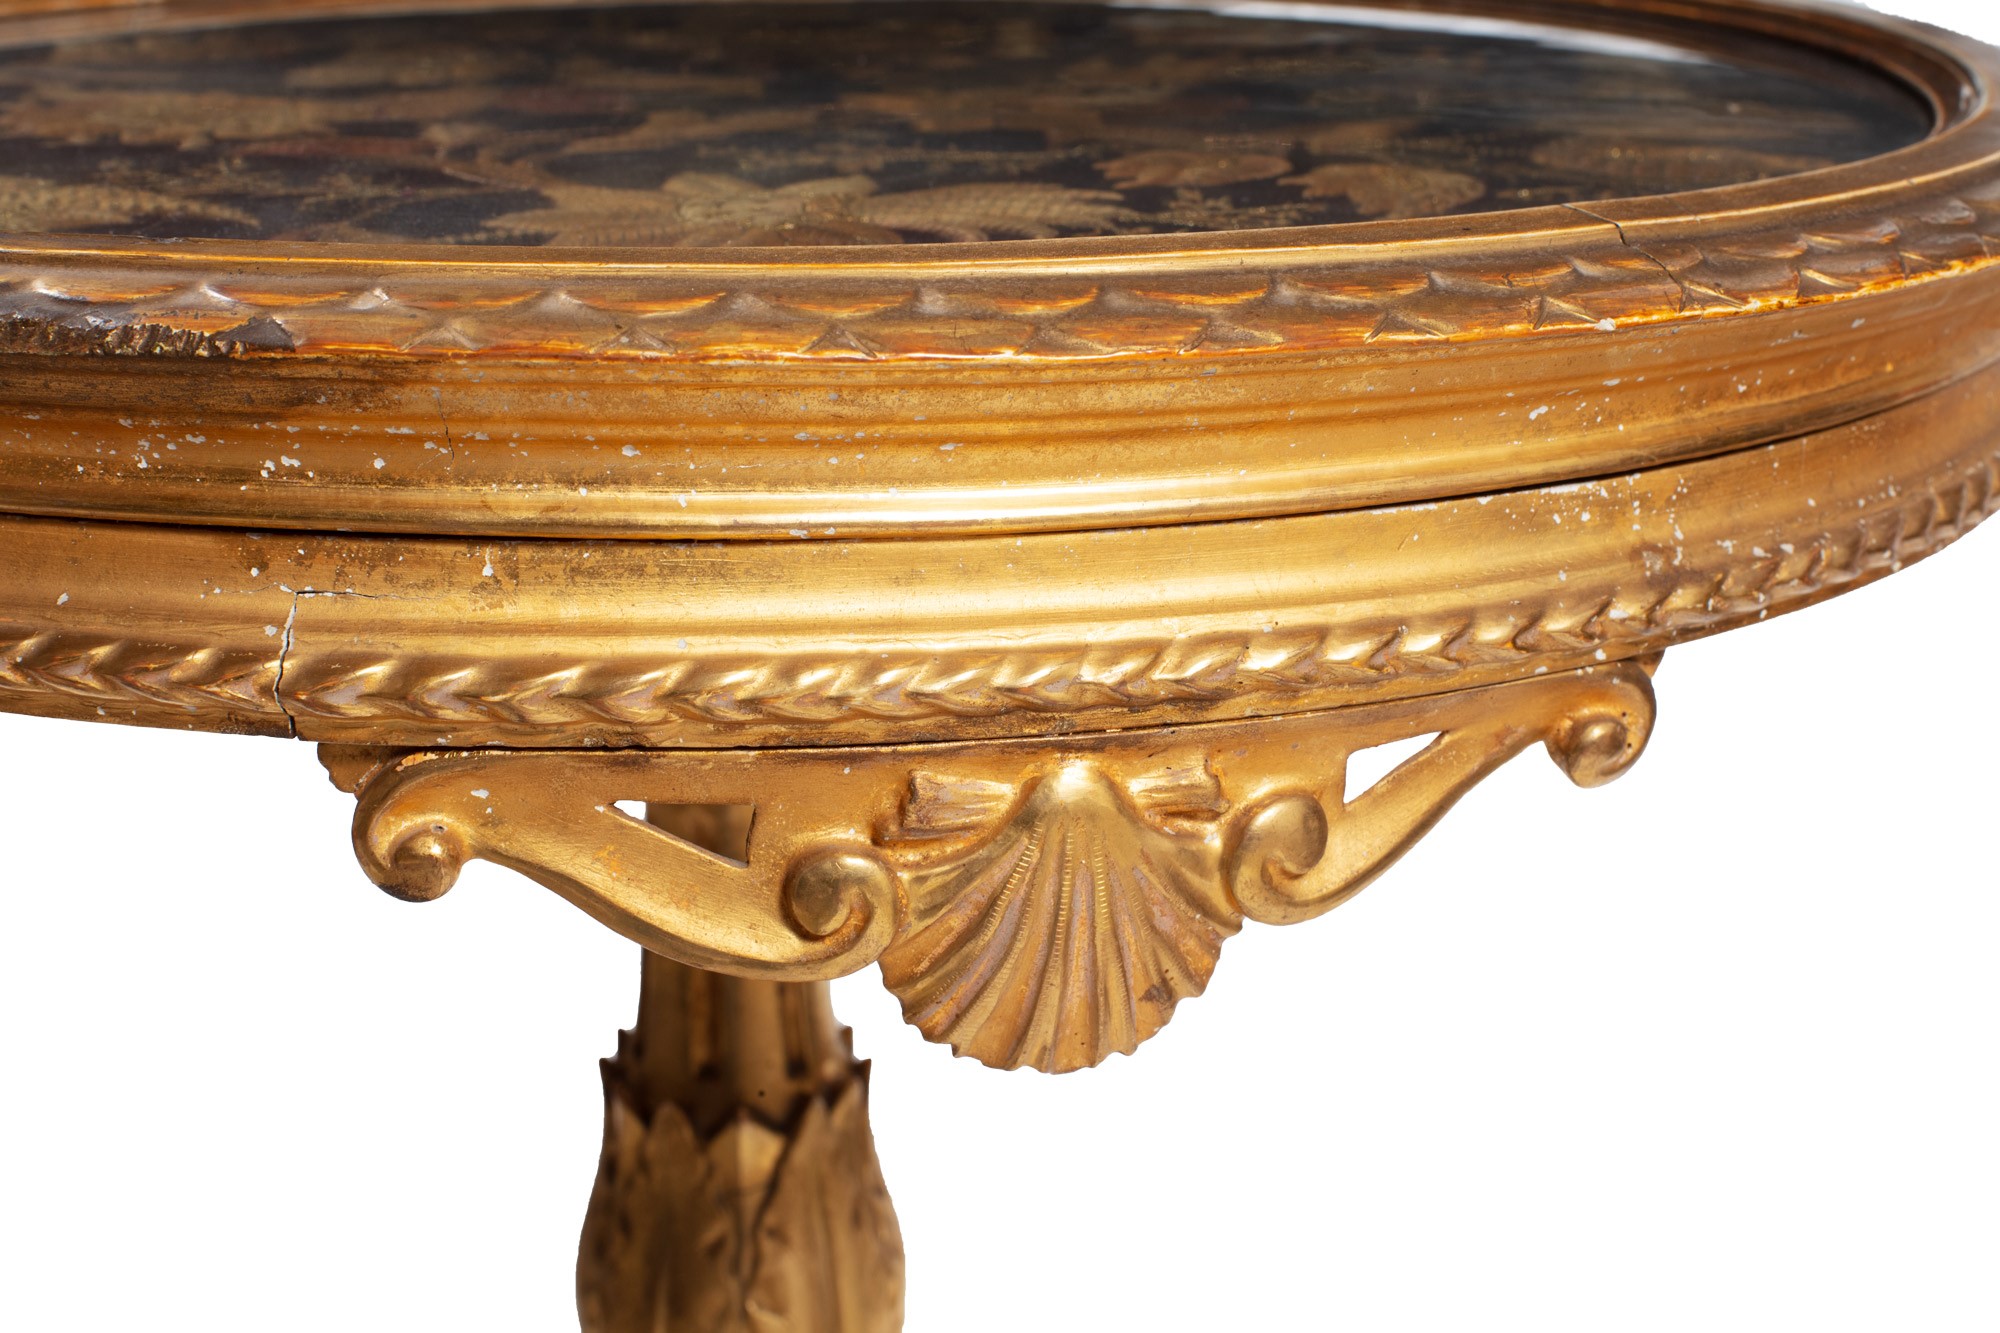 Carved and gilded wooden coffee table manifacture ligure, mid 19th century, with tripod base, - Image 4 of 8